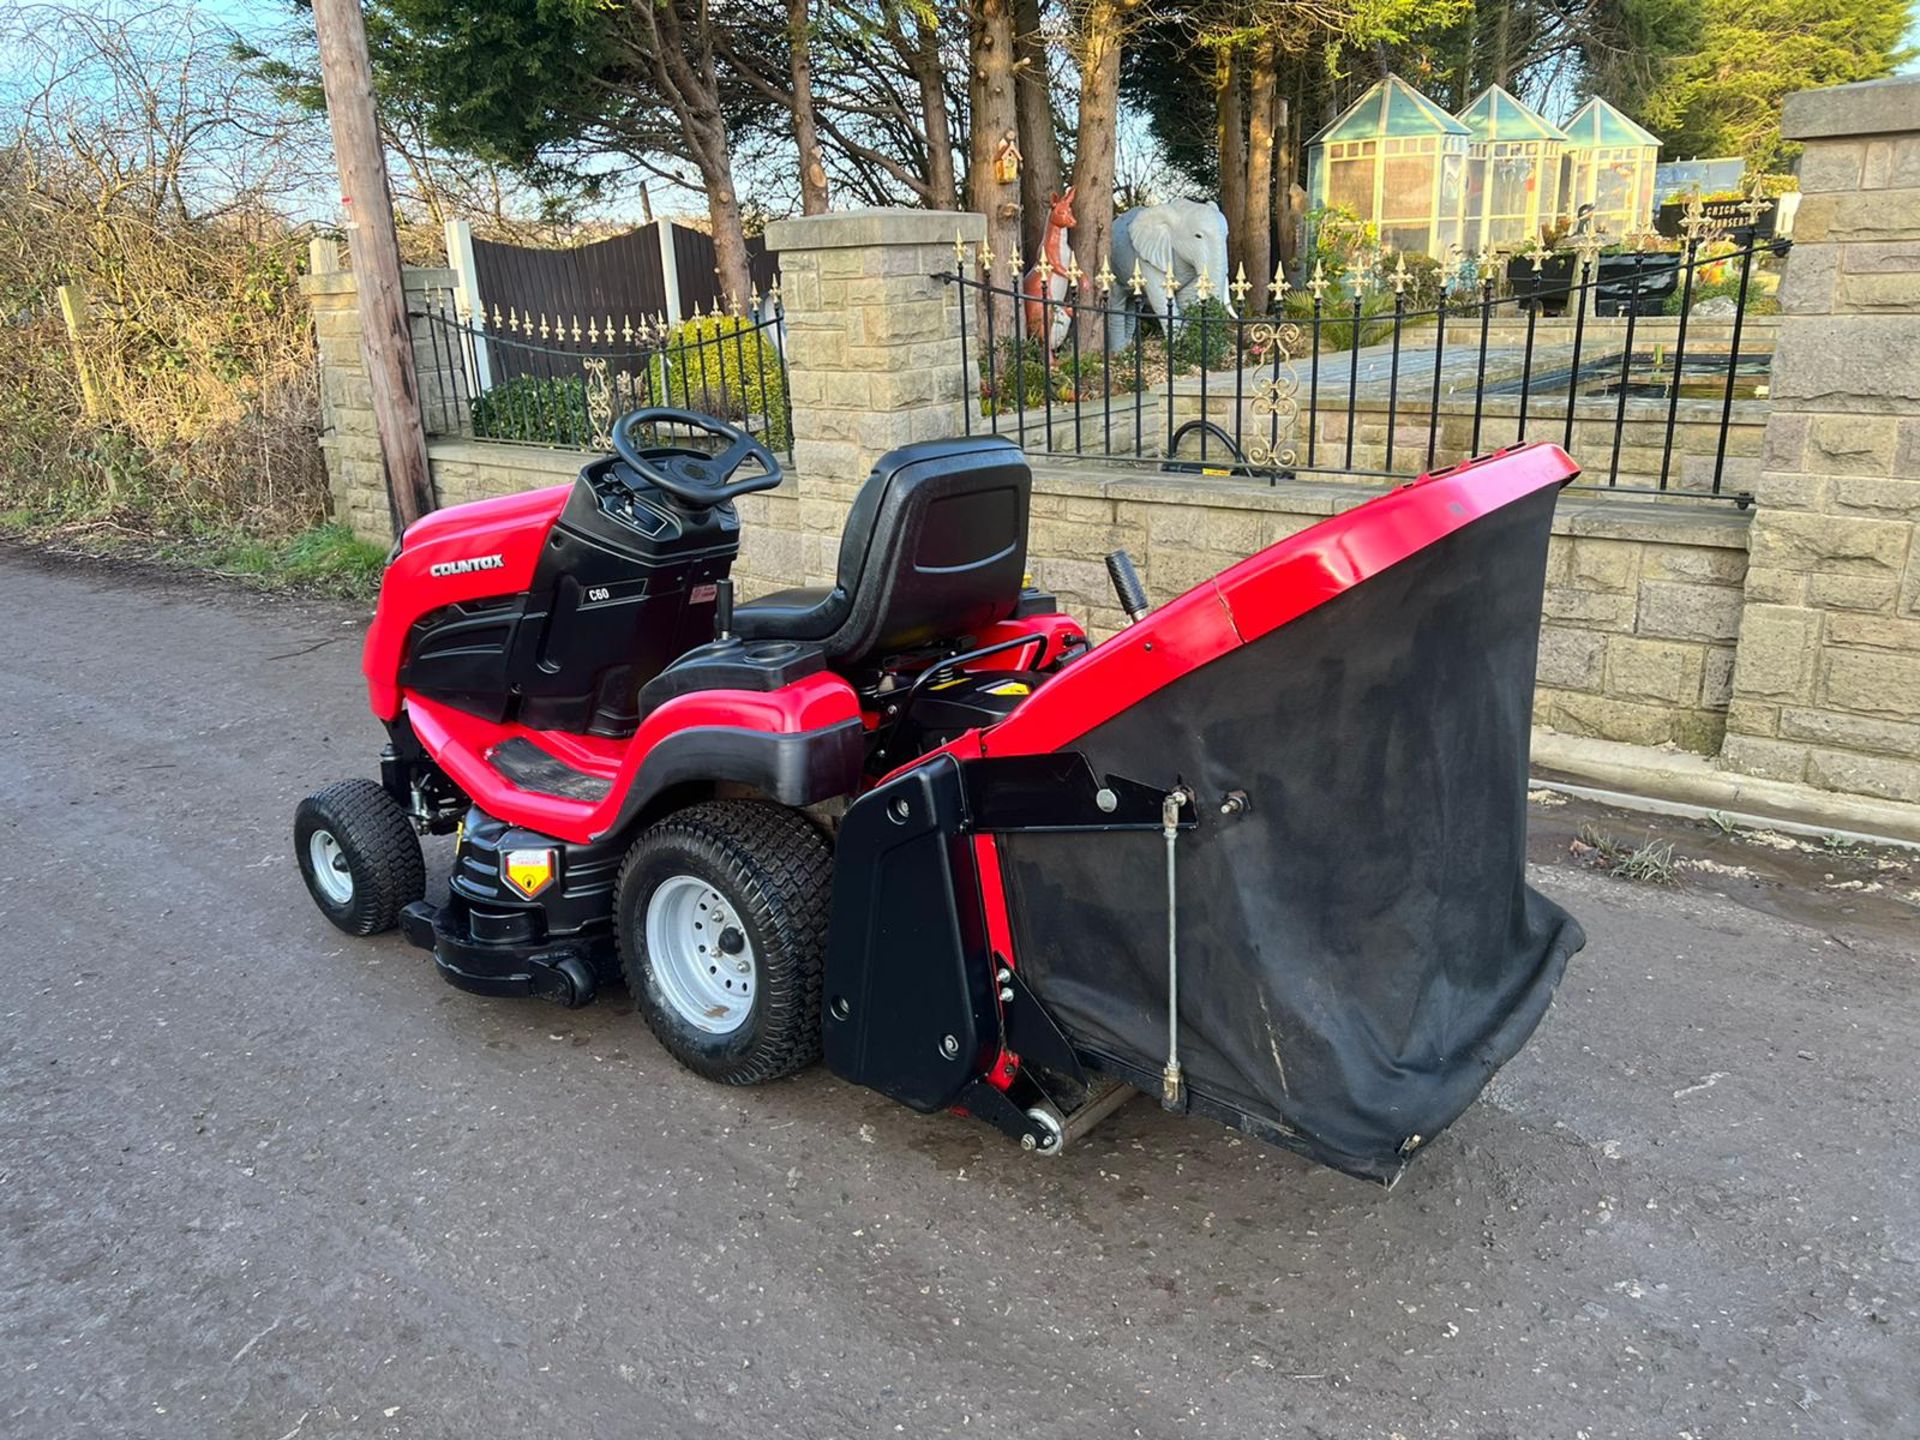 2016 WESTWOOD/COUNTAX 60 RIDE ON LAWN MOWER WITH PGC, SHOWING A LOW 102 HOURS *NO VAT* - Image 4 of 8